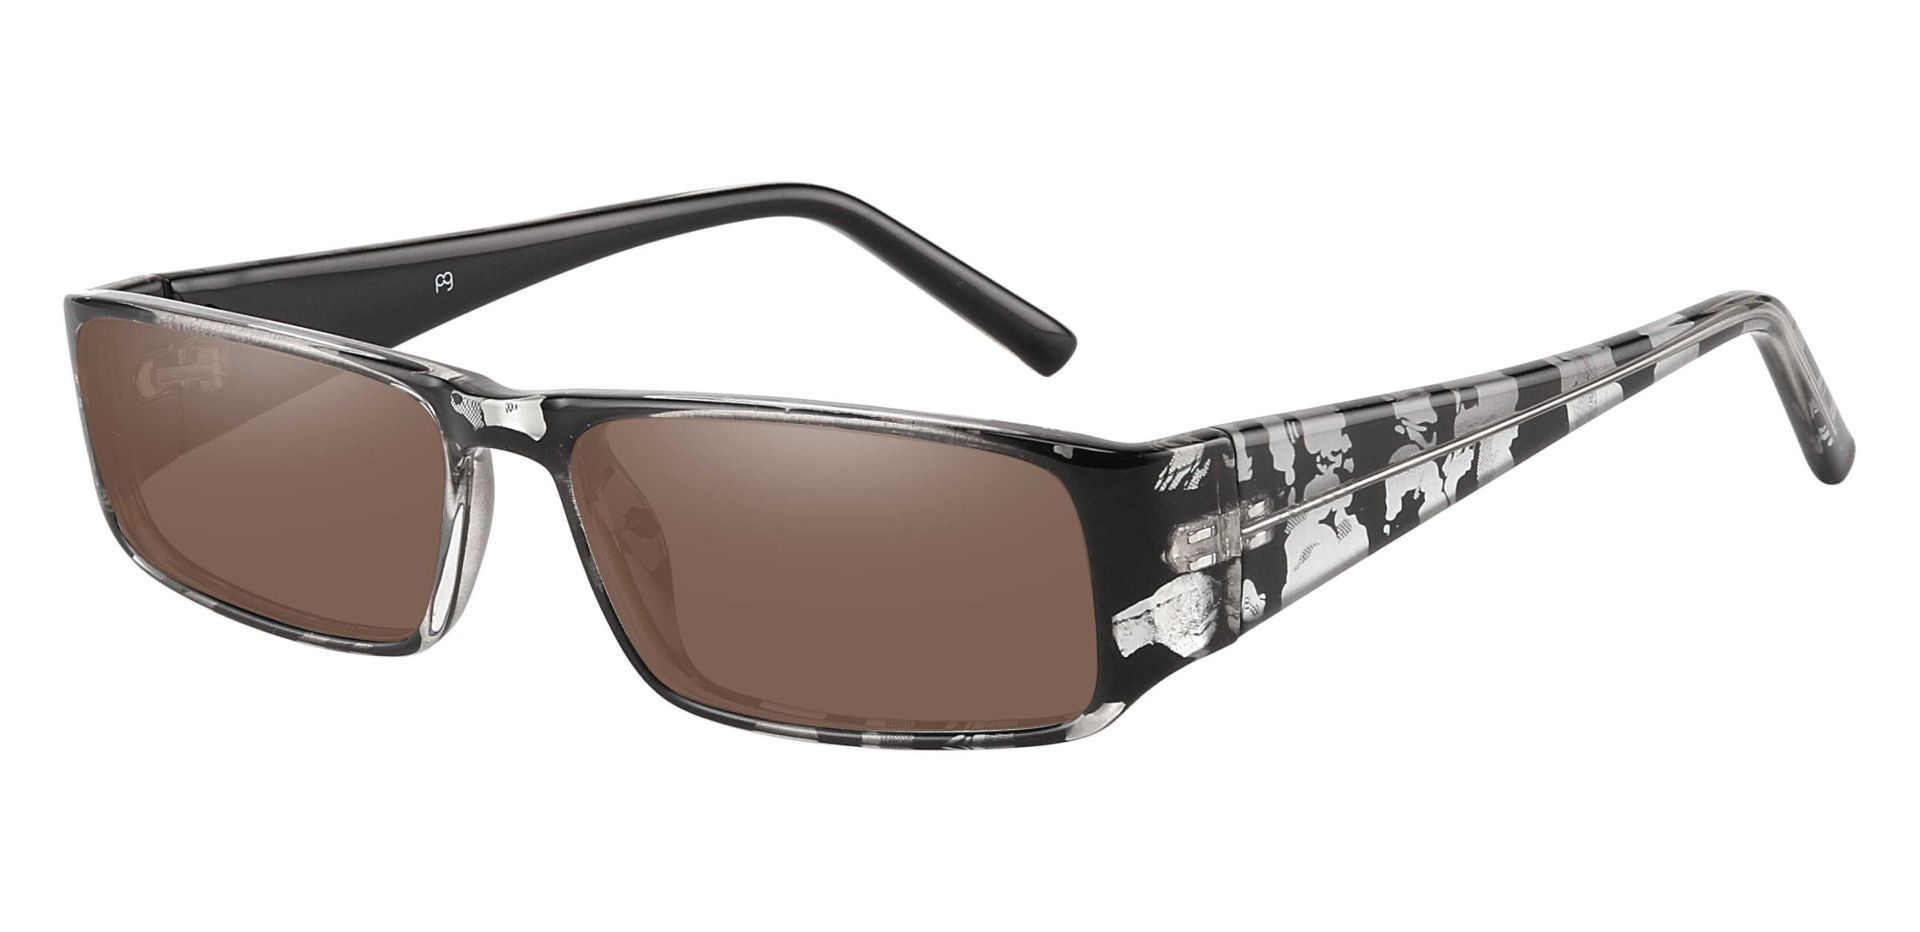 Elbert Rectangle Non-Rx Sunglasses - Black Frame With Brown Lenses